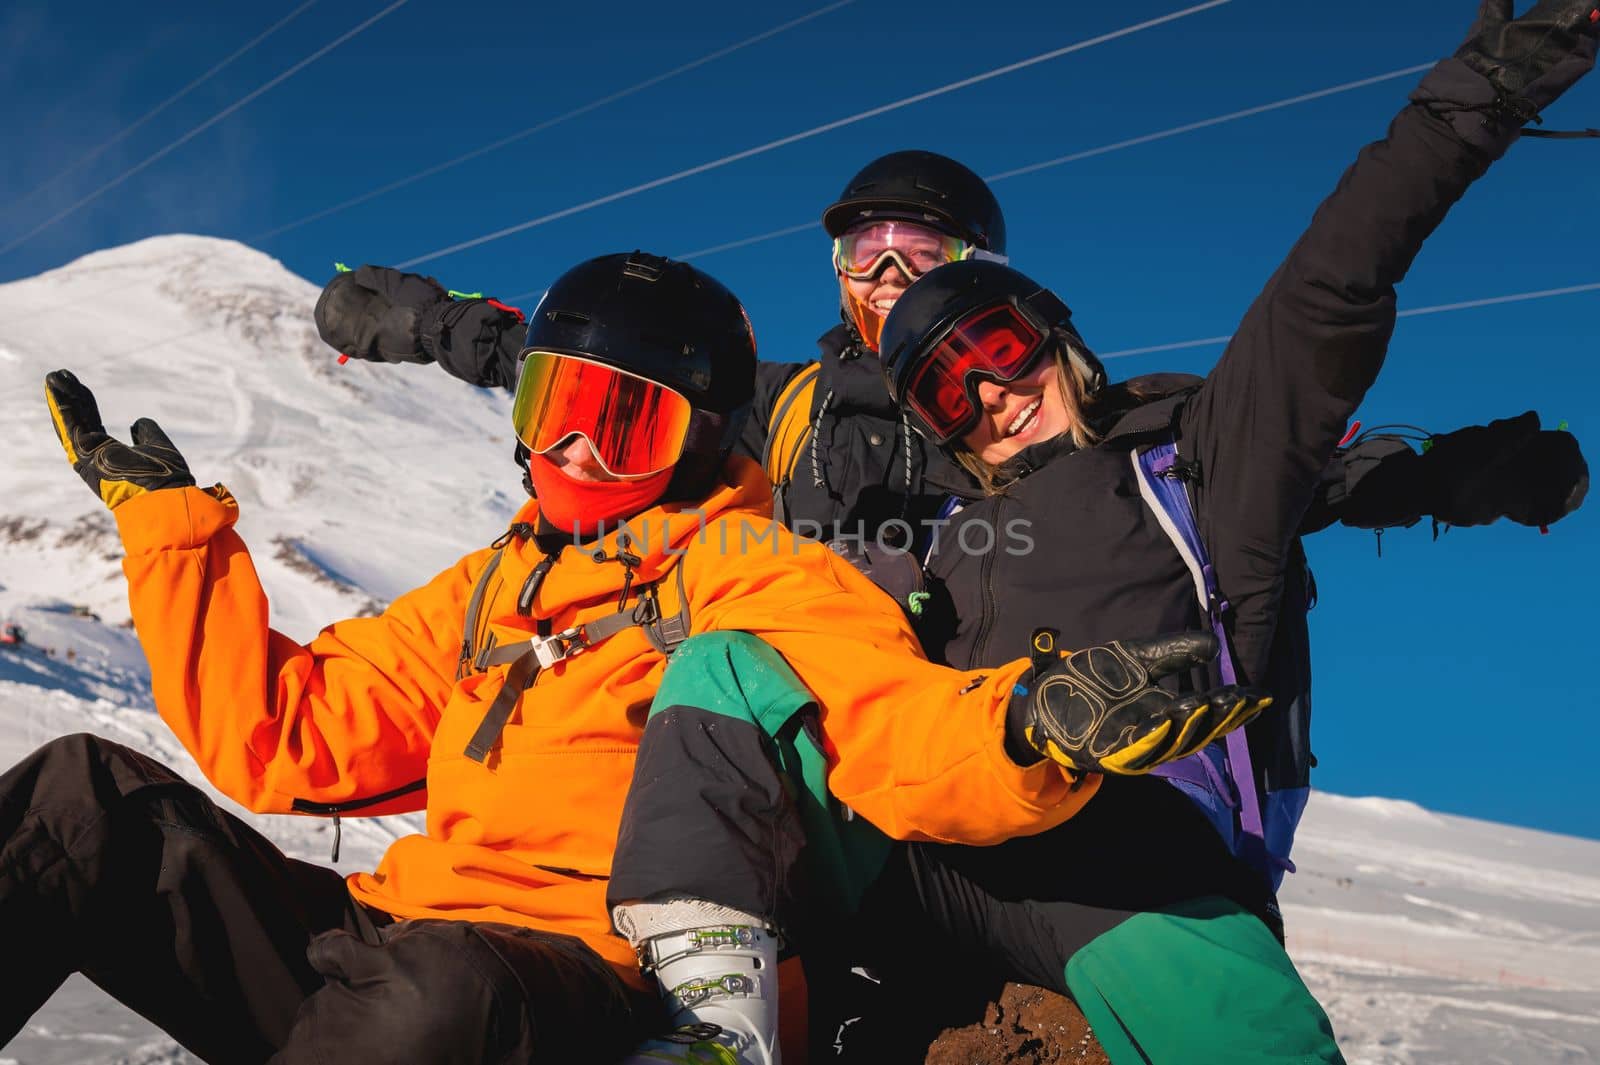 Laughing friends on winter vacation with skiing in snowy mountains, looking at camera. A company of people is enjoying a winter holiday in a ski resort by yanik88